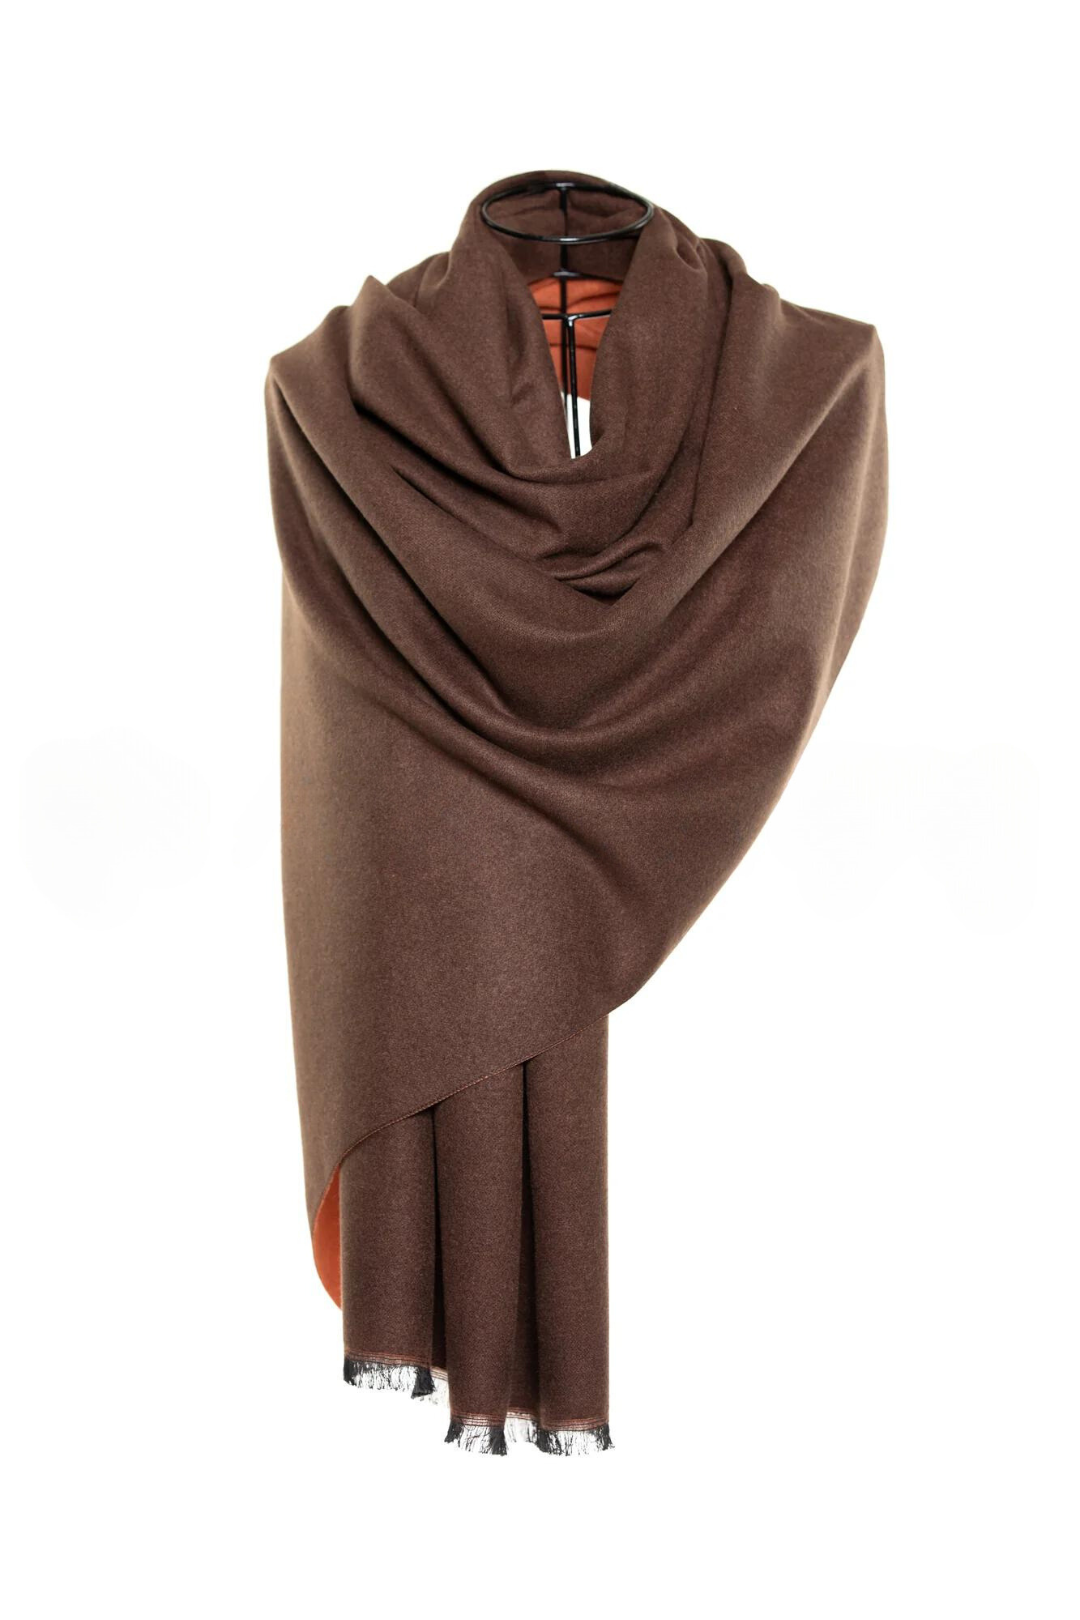 Reversible Mo-shmere Color Block Shawl - Grizzly Orange